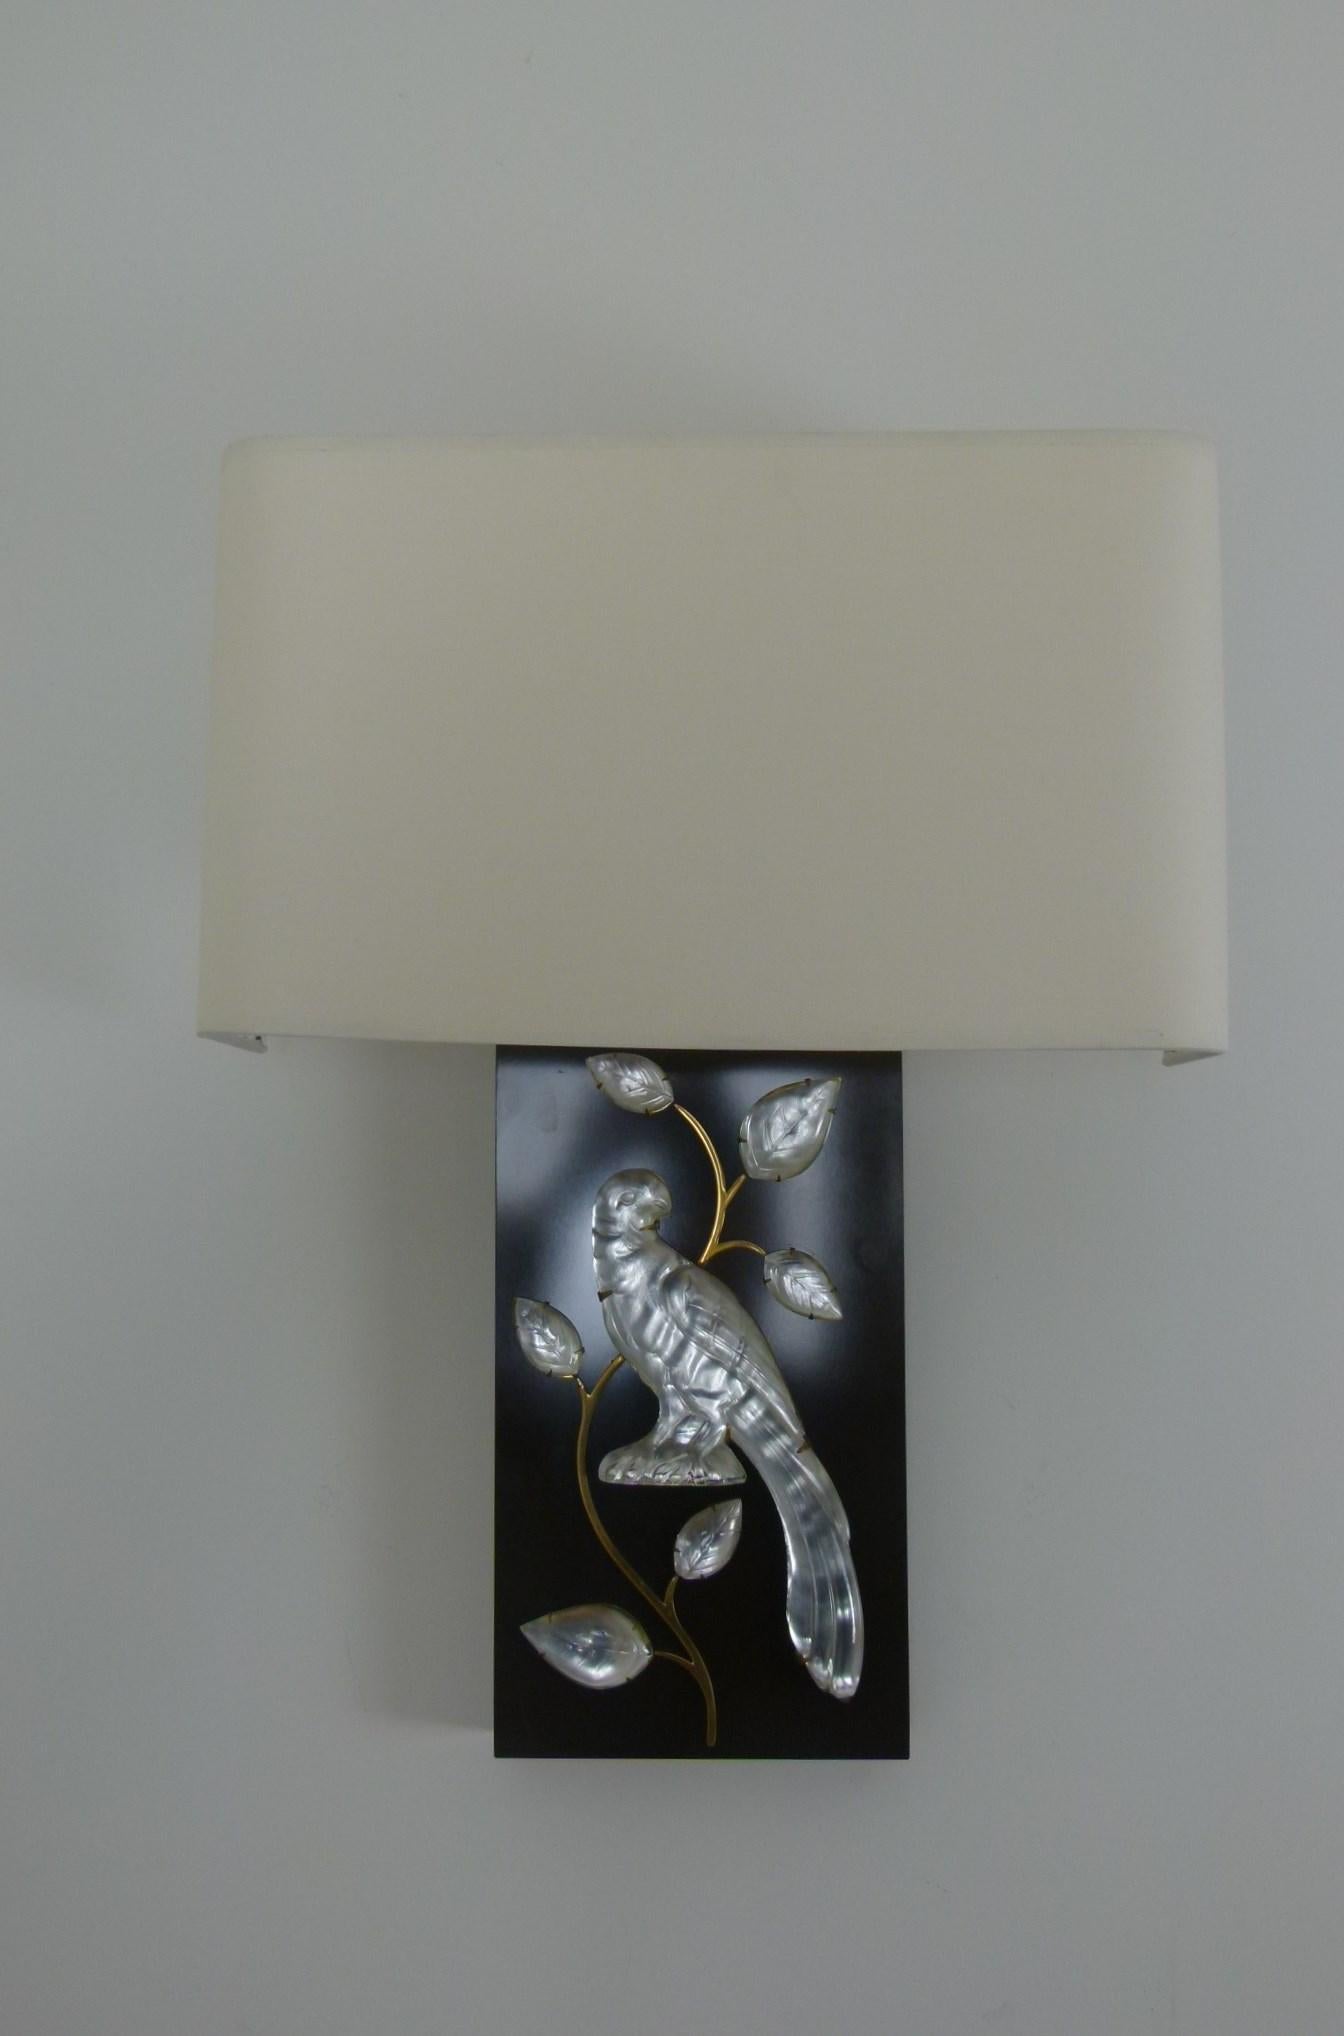 Series of 4 wall lights in chocolate lacquered wood, parrot motif in crystal and brass.
French work circa 1970 from Maison Baguès
Stamp on the back of each sconce.
Perfect original condition.